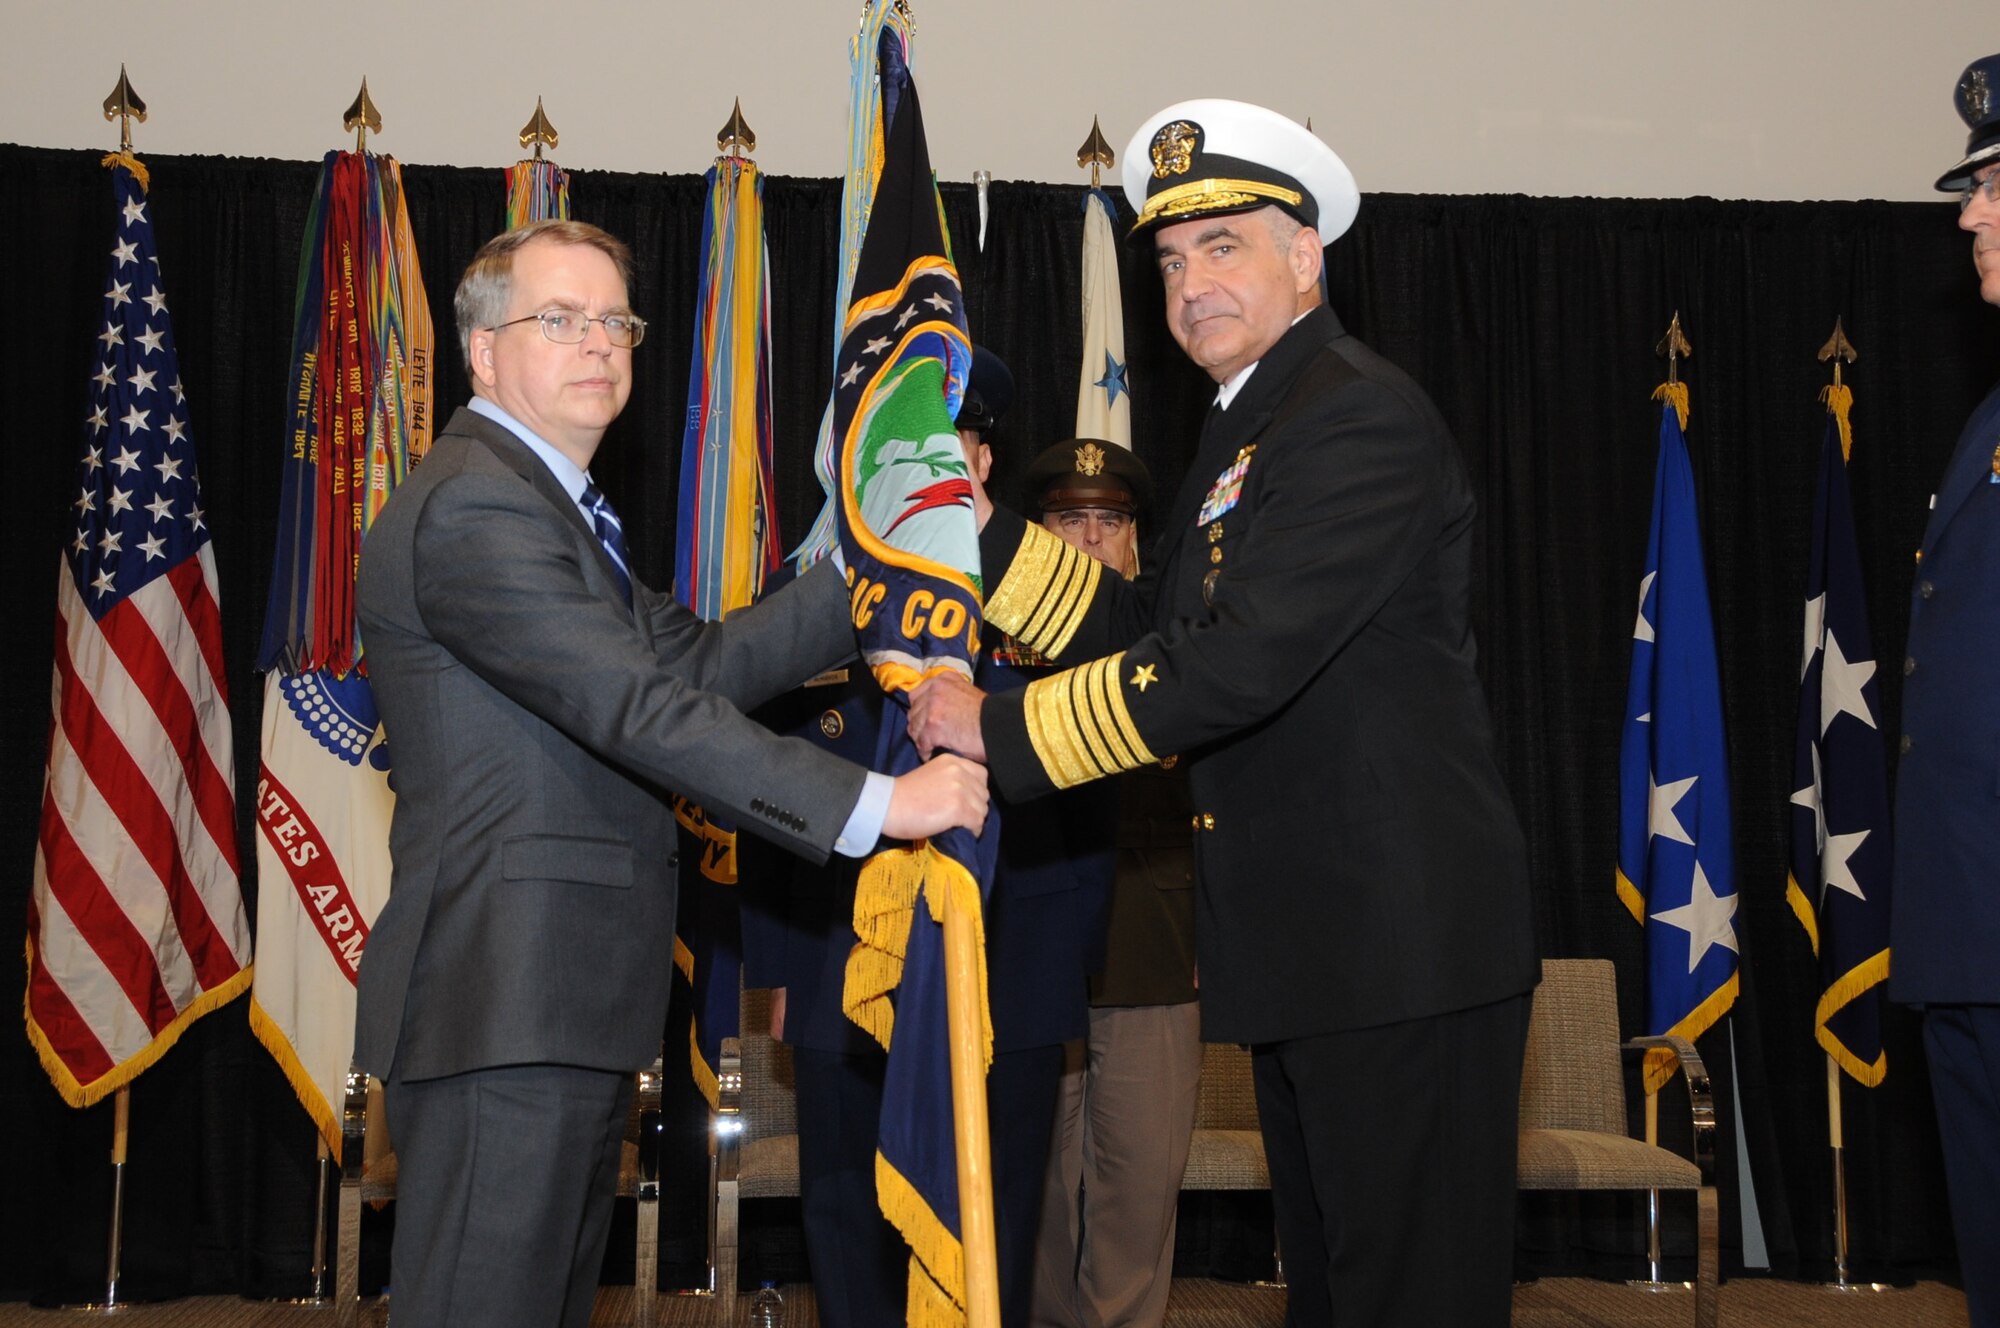 U.S. Navy Adm. Charles A. Richard accepts the U.S. Strategic Command guidon from Deputy Secretary of Defense David L. Norquist as he assumes command of U.S. Strategic Command (USSTRATCOM) during a change of command ceremony at Offutt Air Force Base, Neb., Nov. 18, 2019. Richard comes to USSTRATCOM after serving as the commander of Submarine Forces; commander of Submarine Force Atlantic and commander of Allied Submarine Command at Naval Station Norfolk, Va. USSTRATCOM has global responsibilities assigned through the Unified Command Plan that include strategic deterrence, nuclear operations, joint electromagnetic spectrum operations, global strike, missile defense, and analysis and targeting. (U.S. Air Force photo by Steve Cunningham)